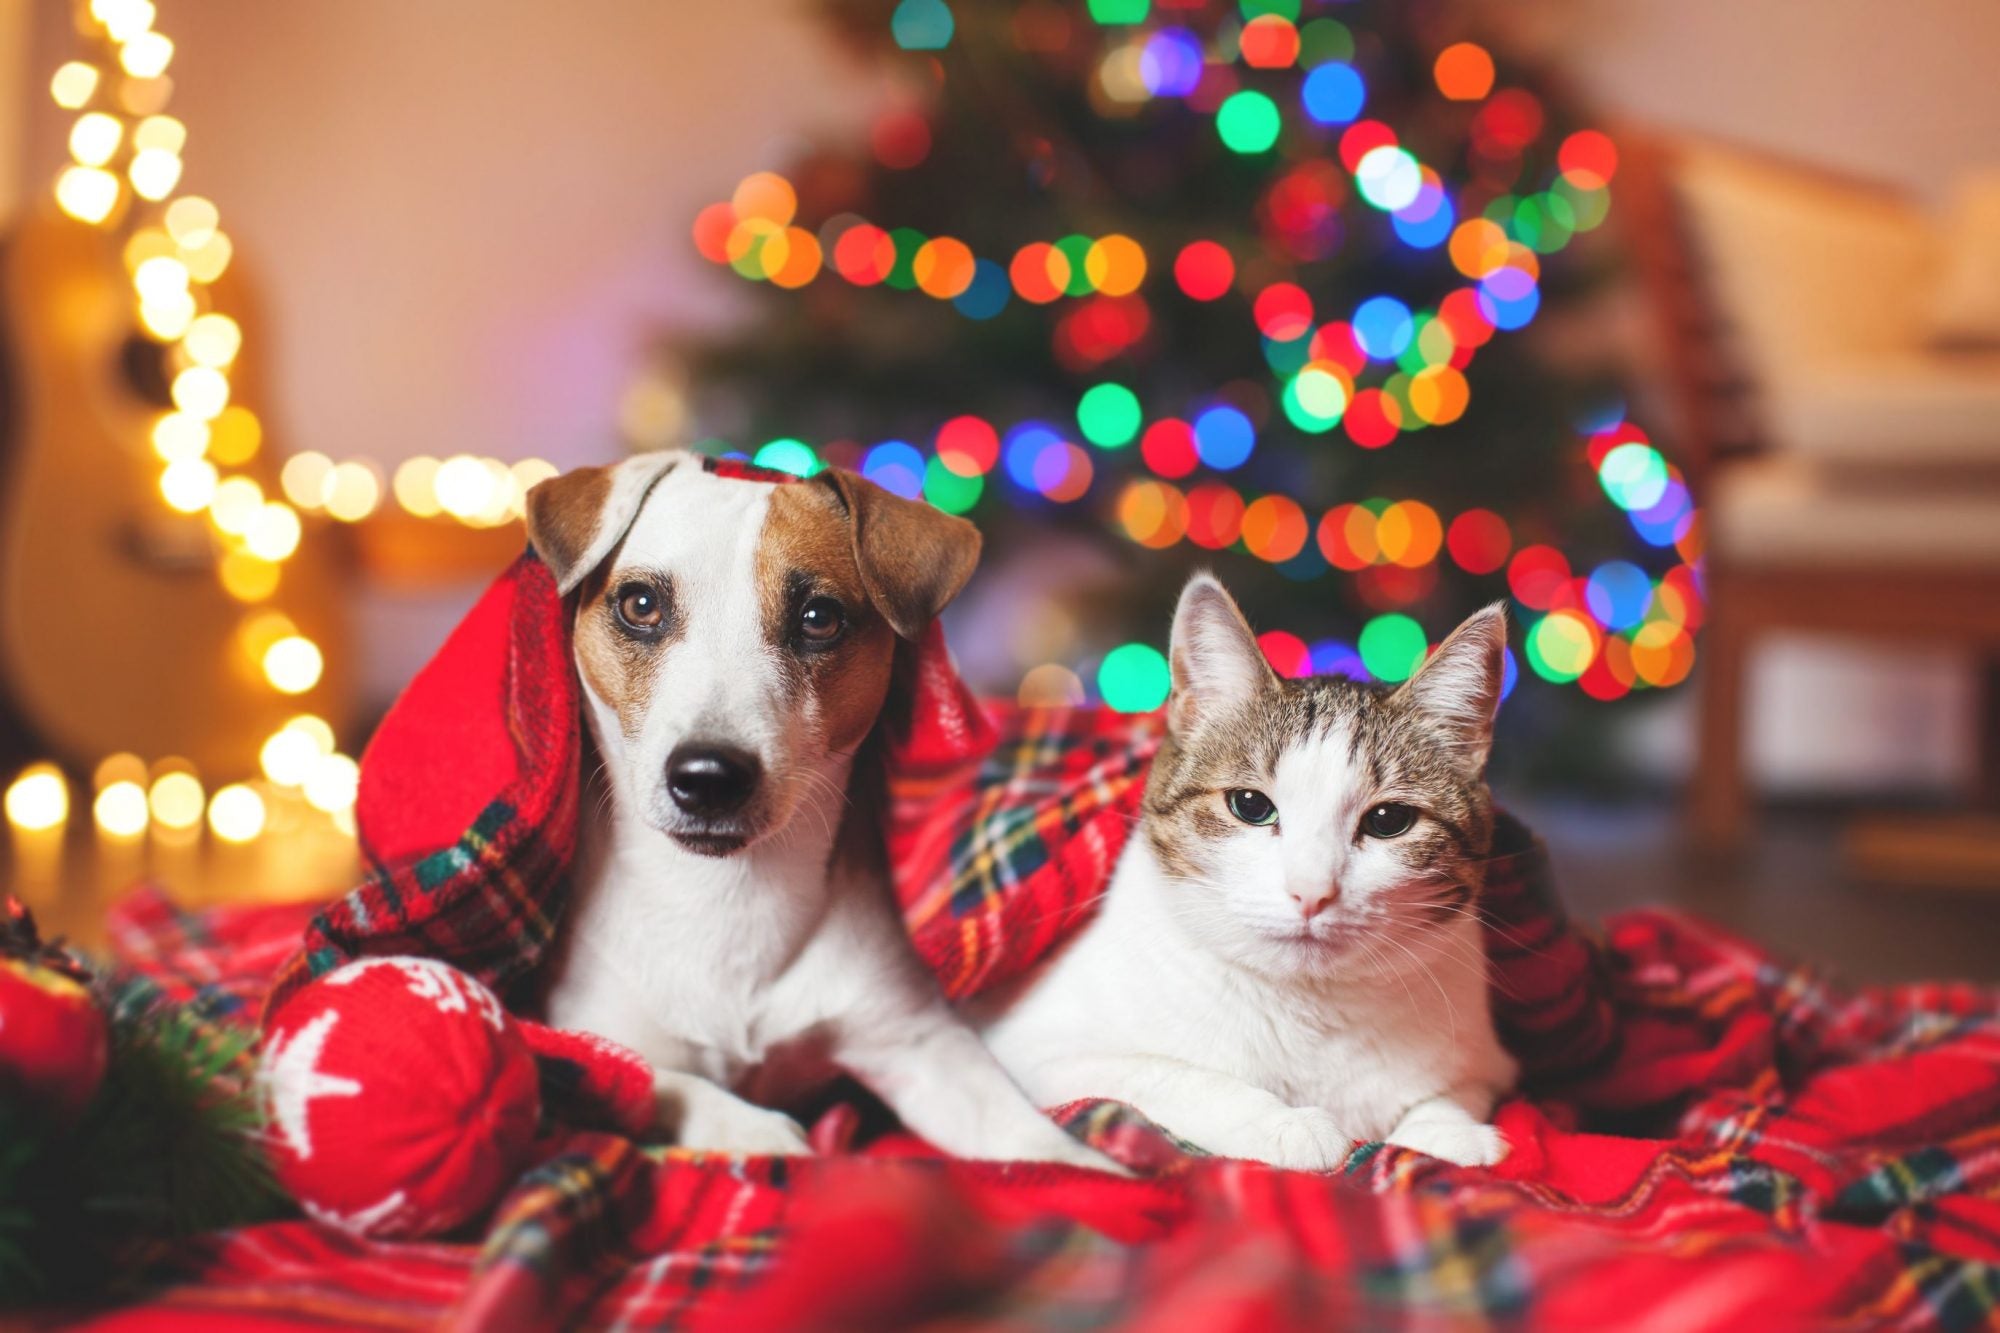 Sizzle Up the Holidays: Why Rava Life's Bacon-Flavored CBD Oil is a Treat for Your Pet